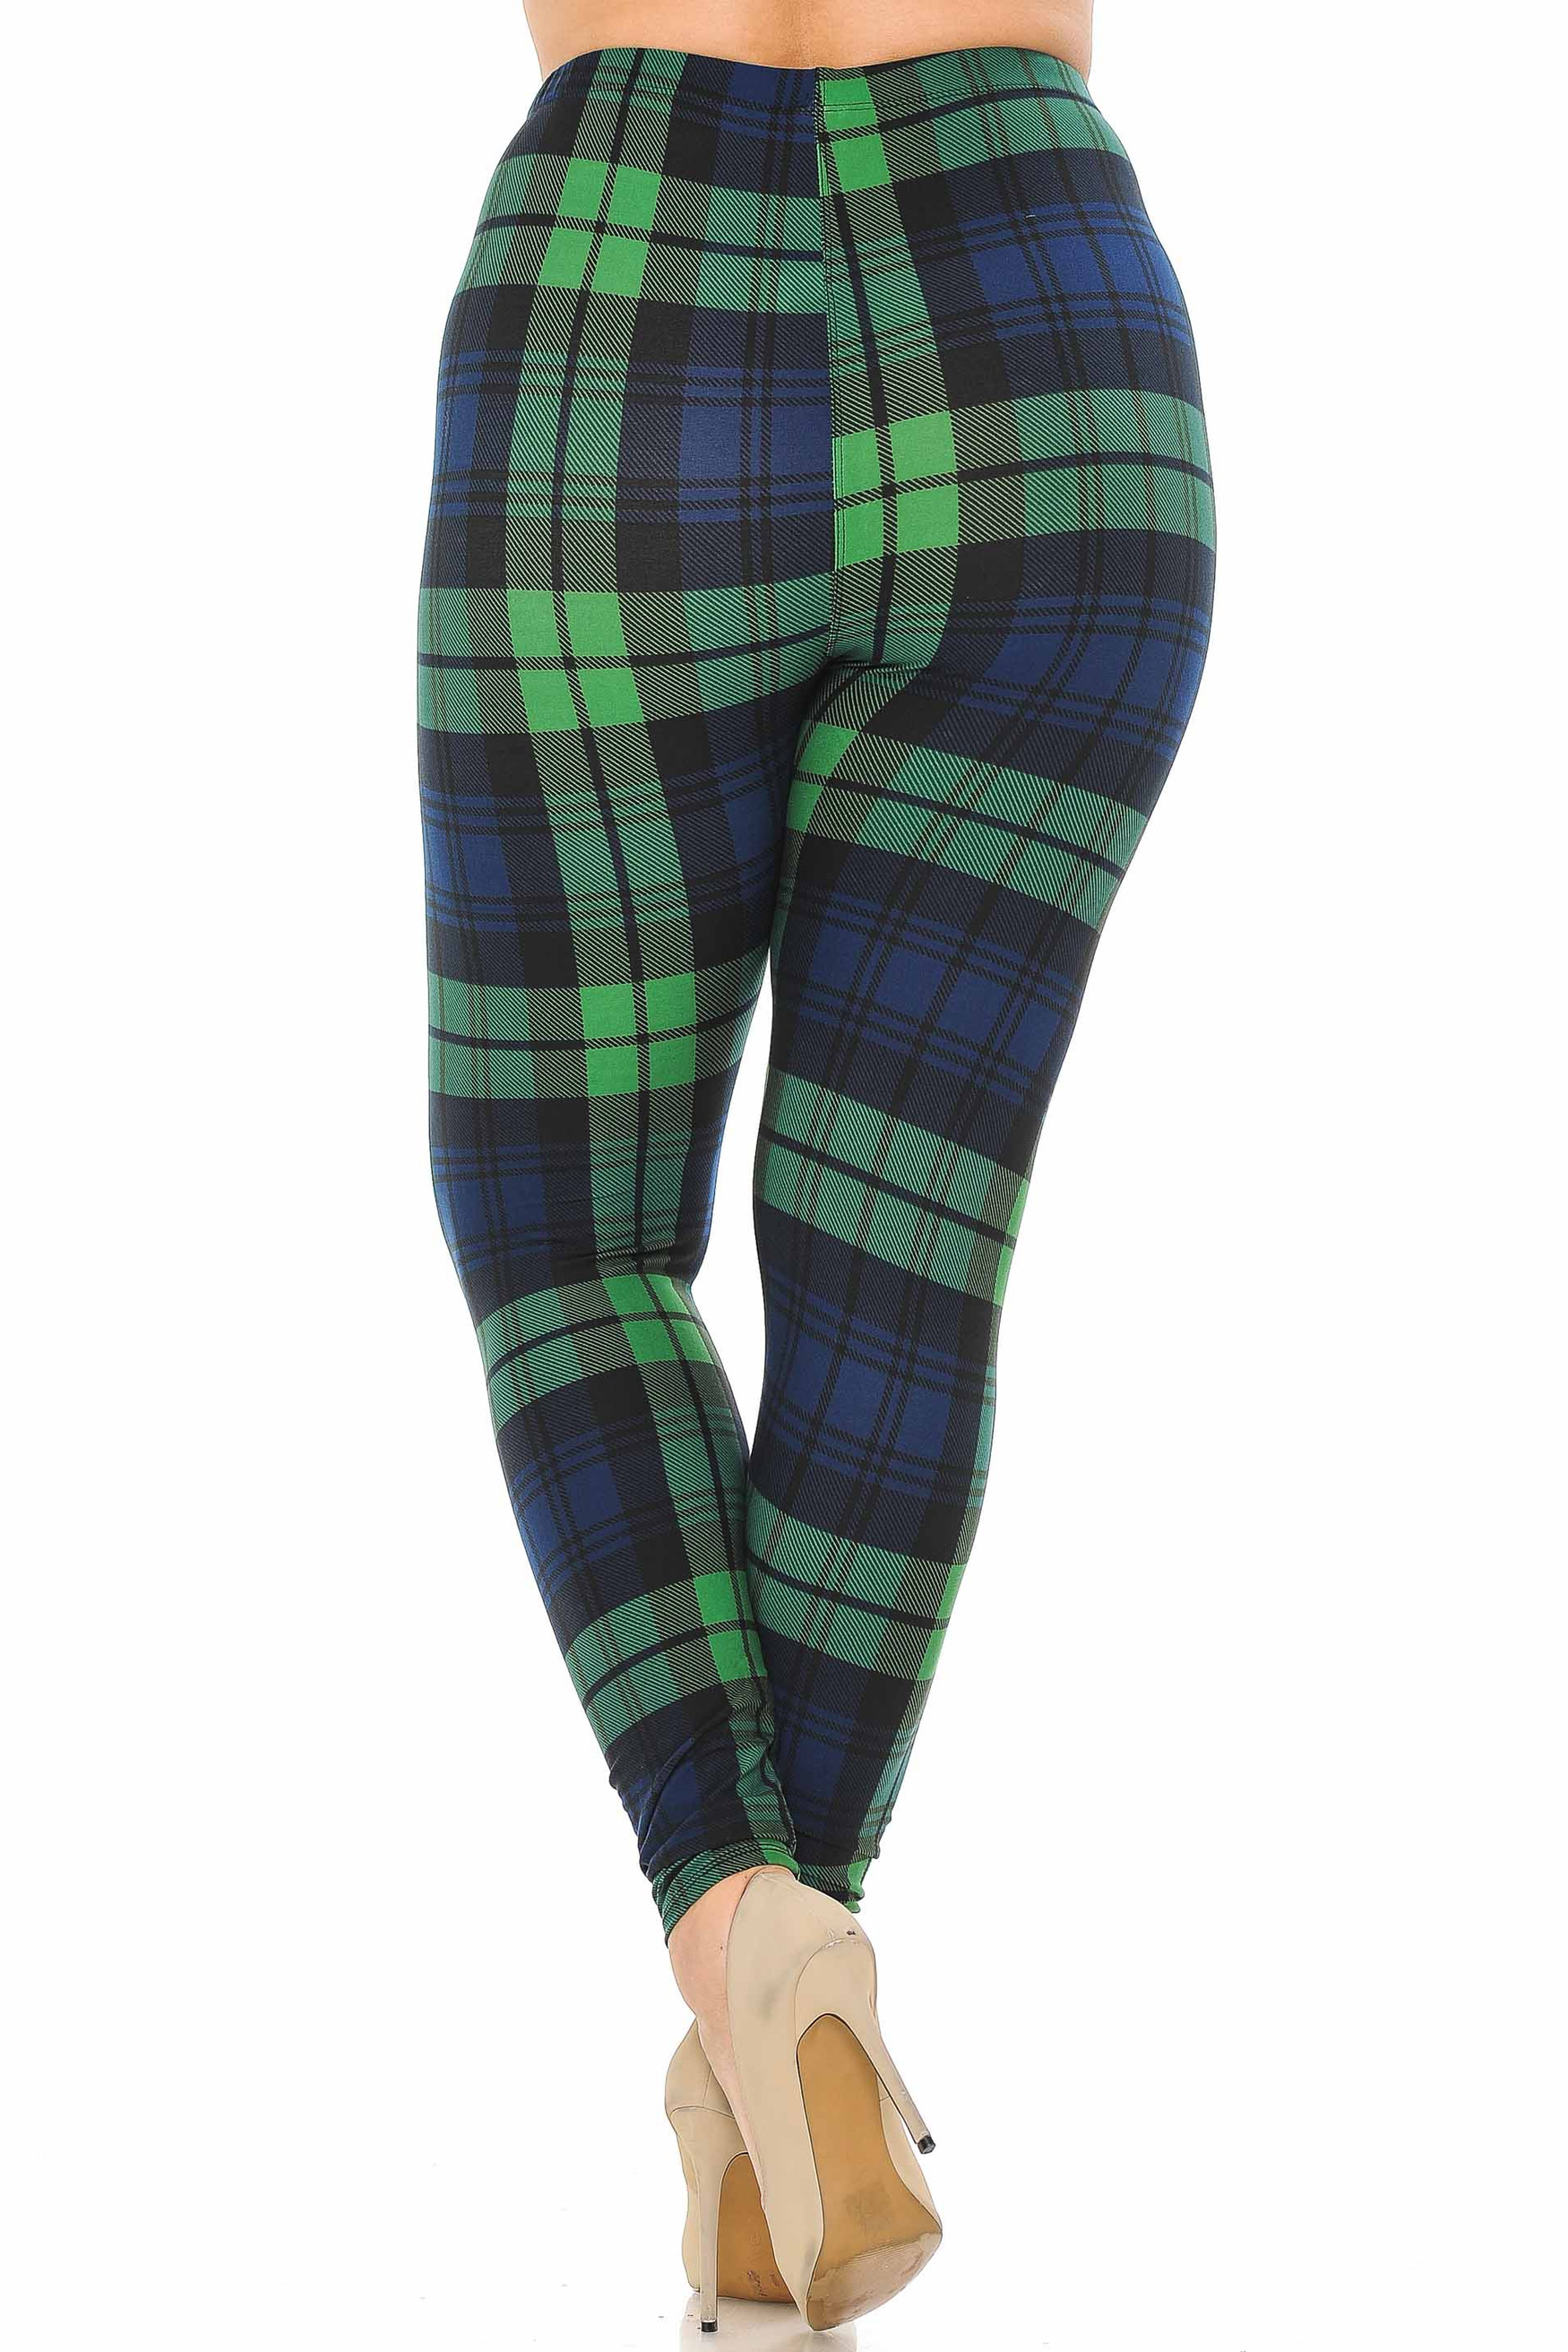 sne Høne announcer Buttery Smooth Green Plaid Plus Size Leggings | Only Leggings Superstore